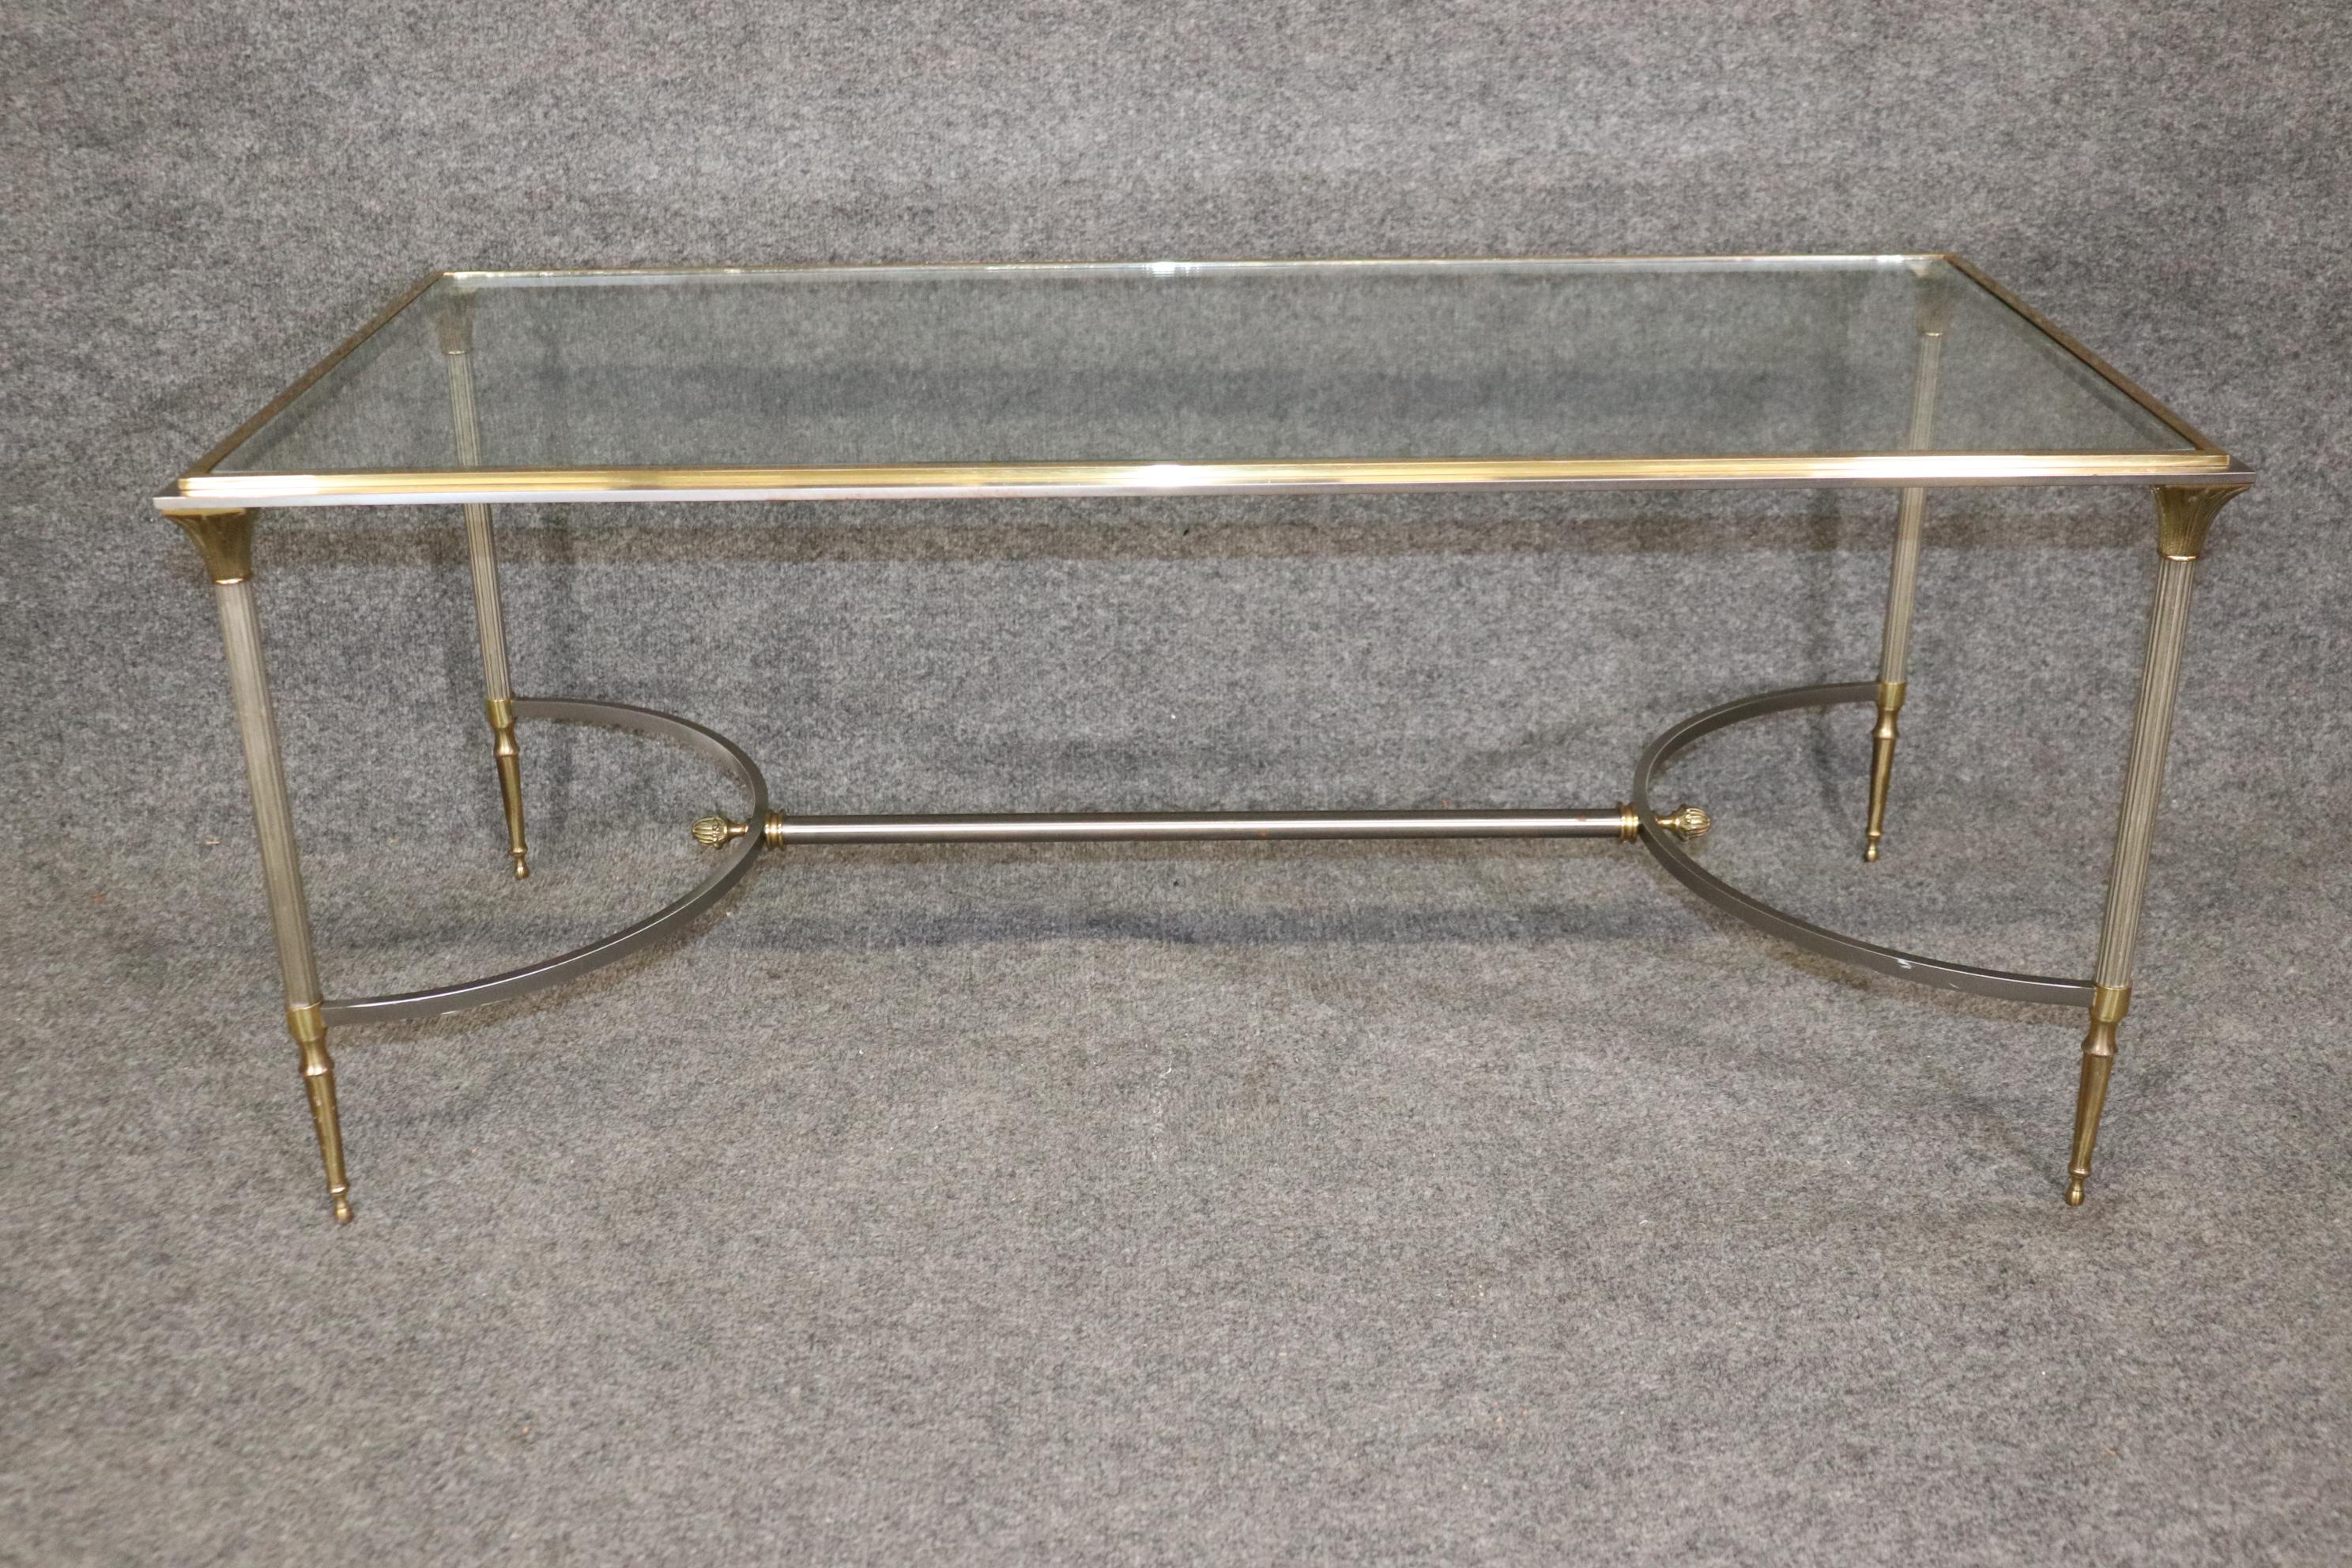 Dimensions: Height: 18 in Width: 42 in Depth: 20 in 

This Directoire style metal and brass glass top coffee table is of the highest quality! Maison Jansen made some of the world's most chic furniture and designed to replicate the earlier styles of